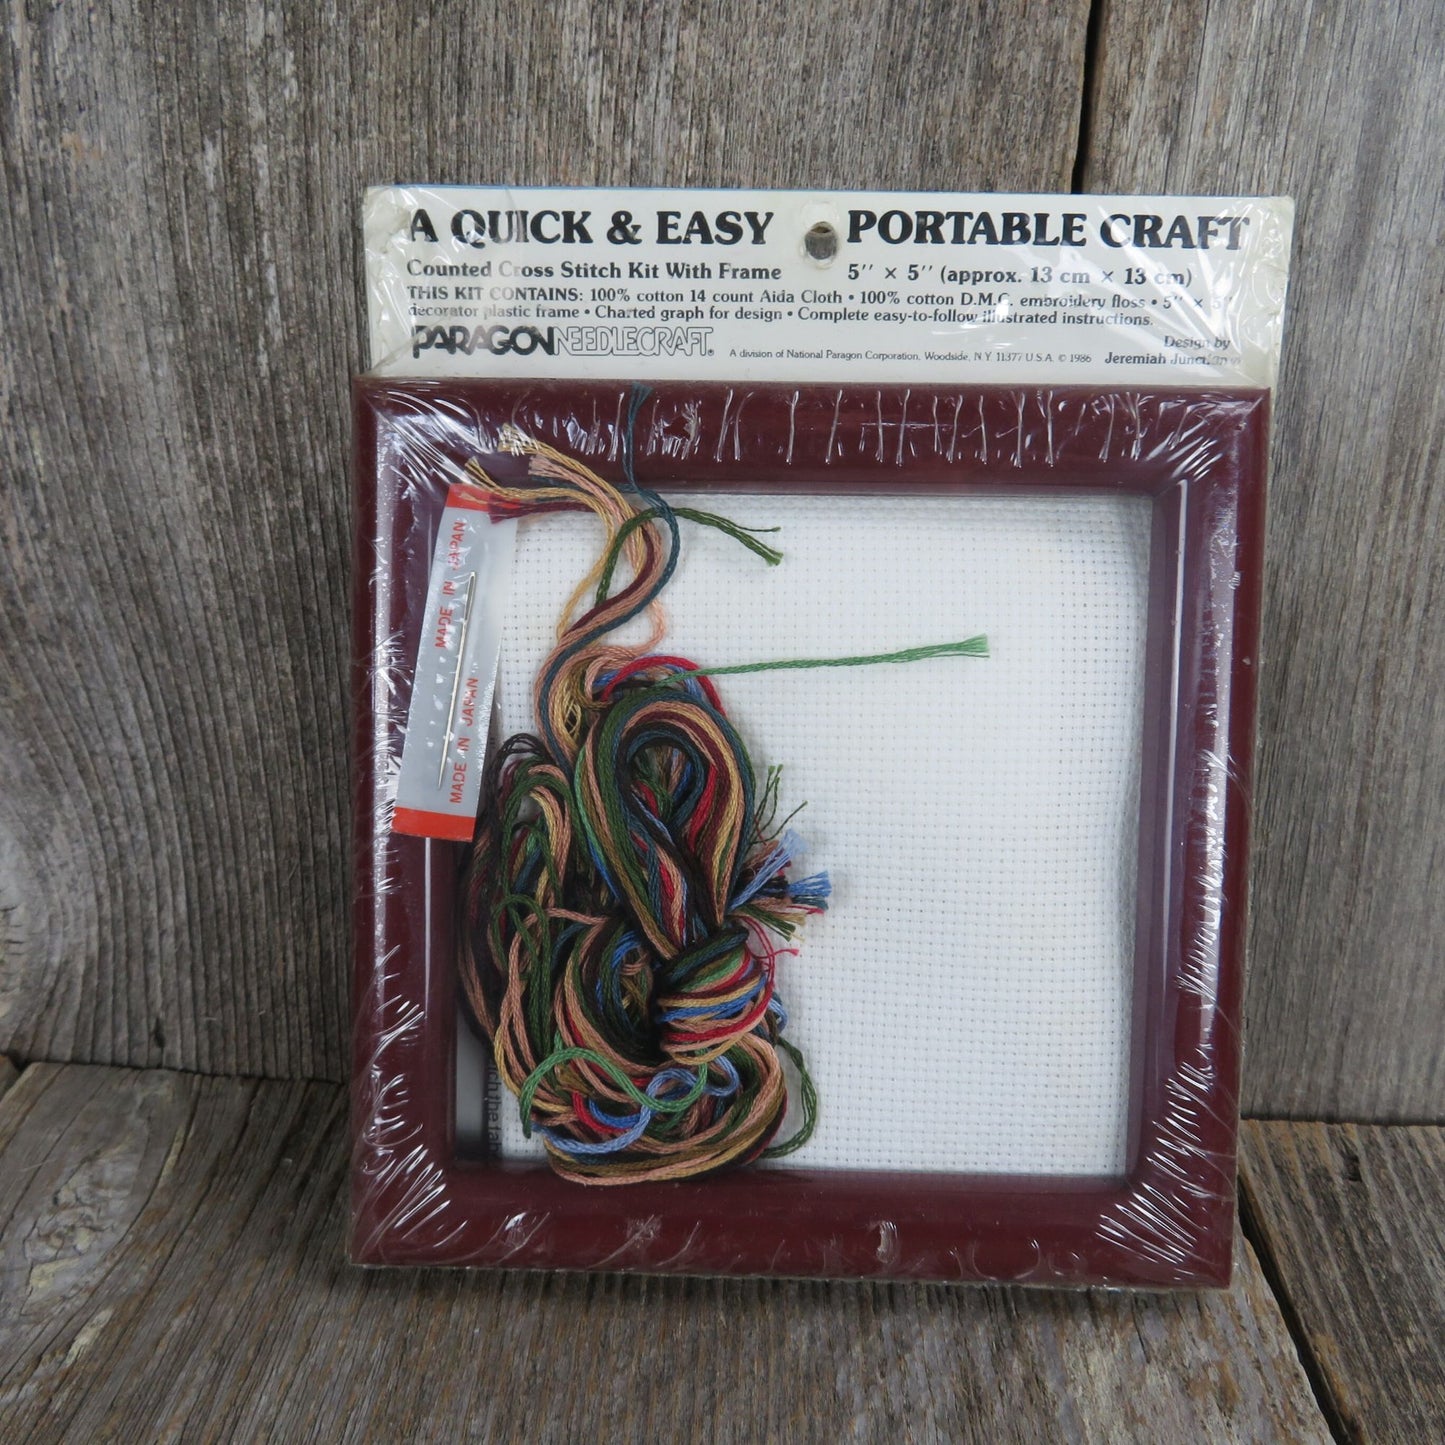 Country Kitchen Counted Cross Stitch Kit Paragon 1986 Framed Kit 8104 Quick and Easy